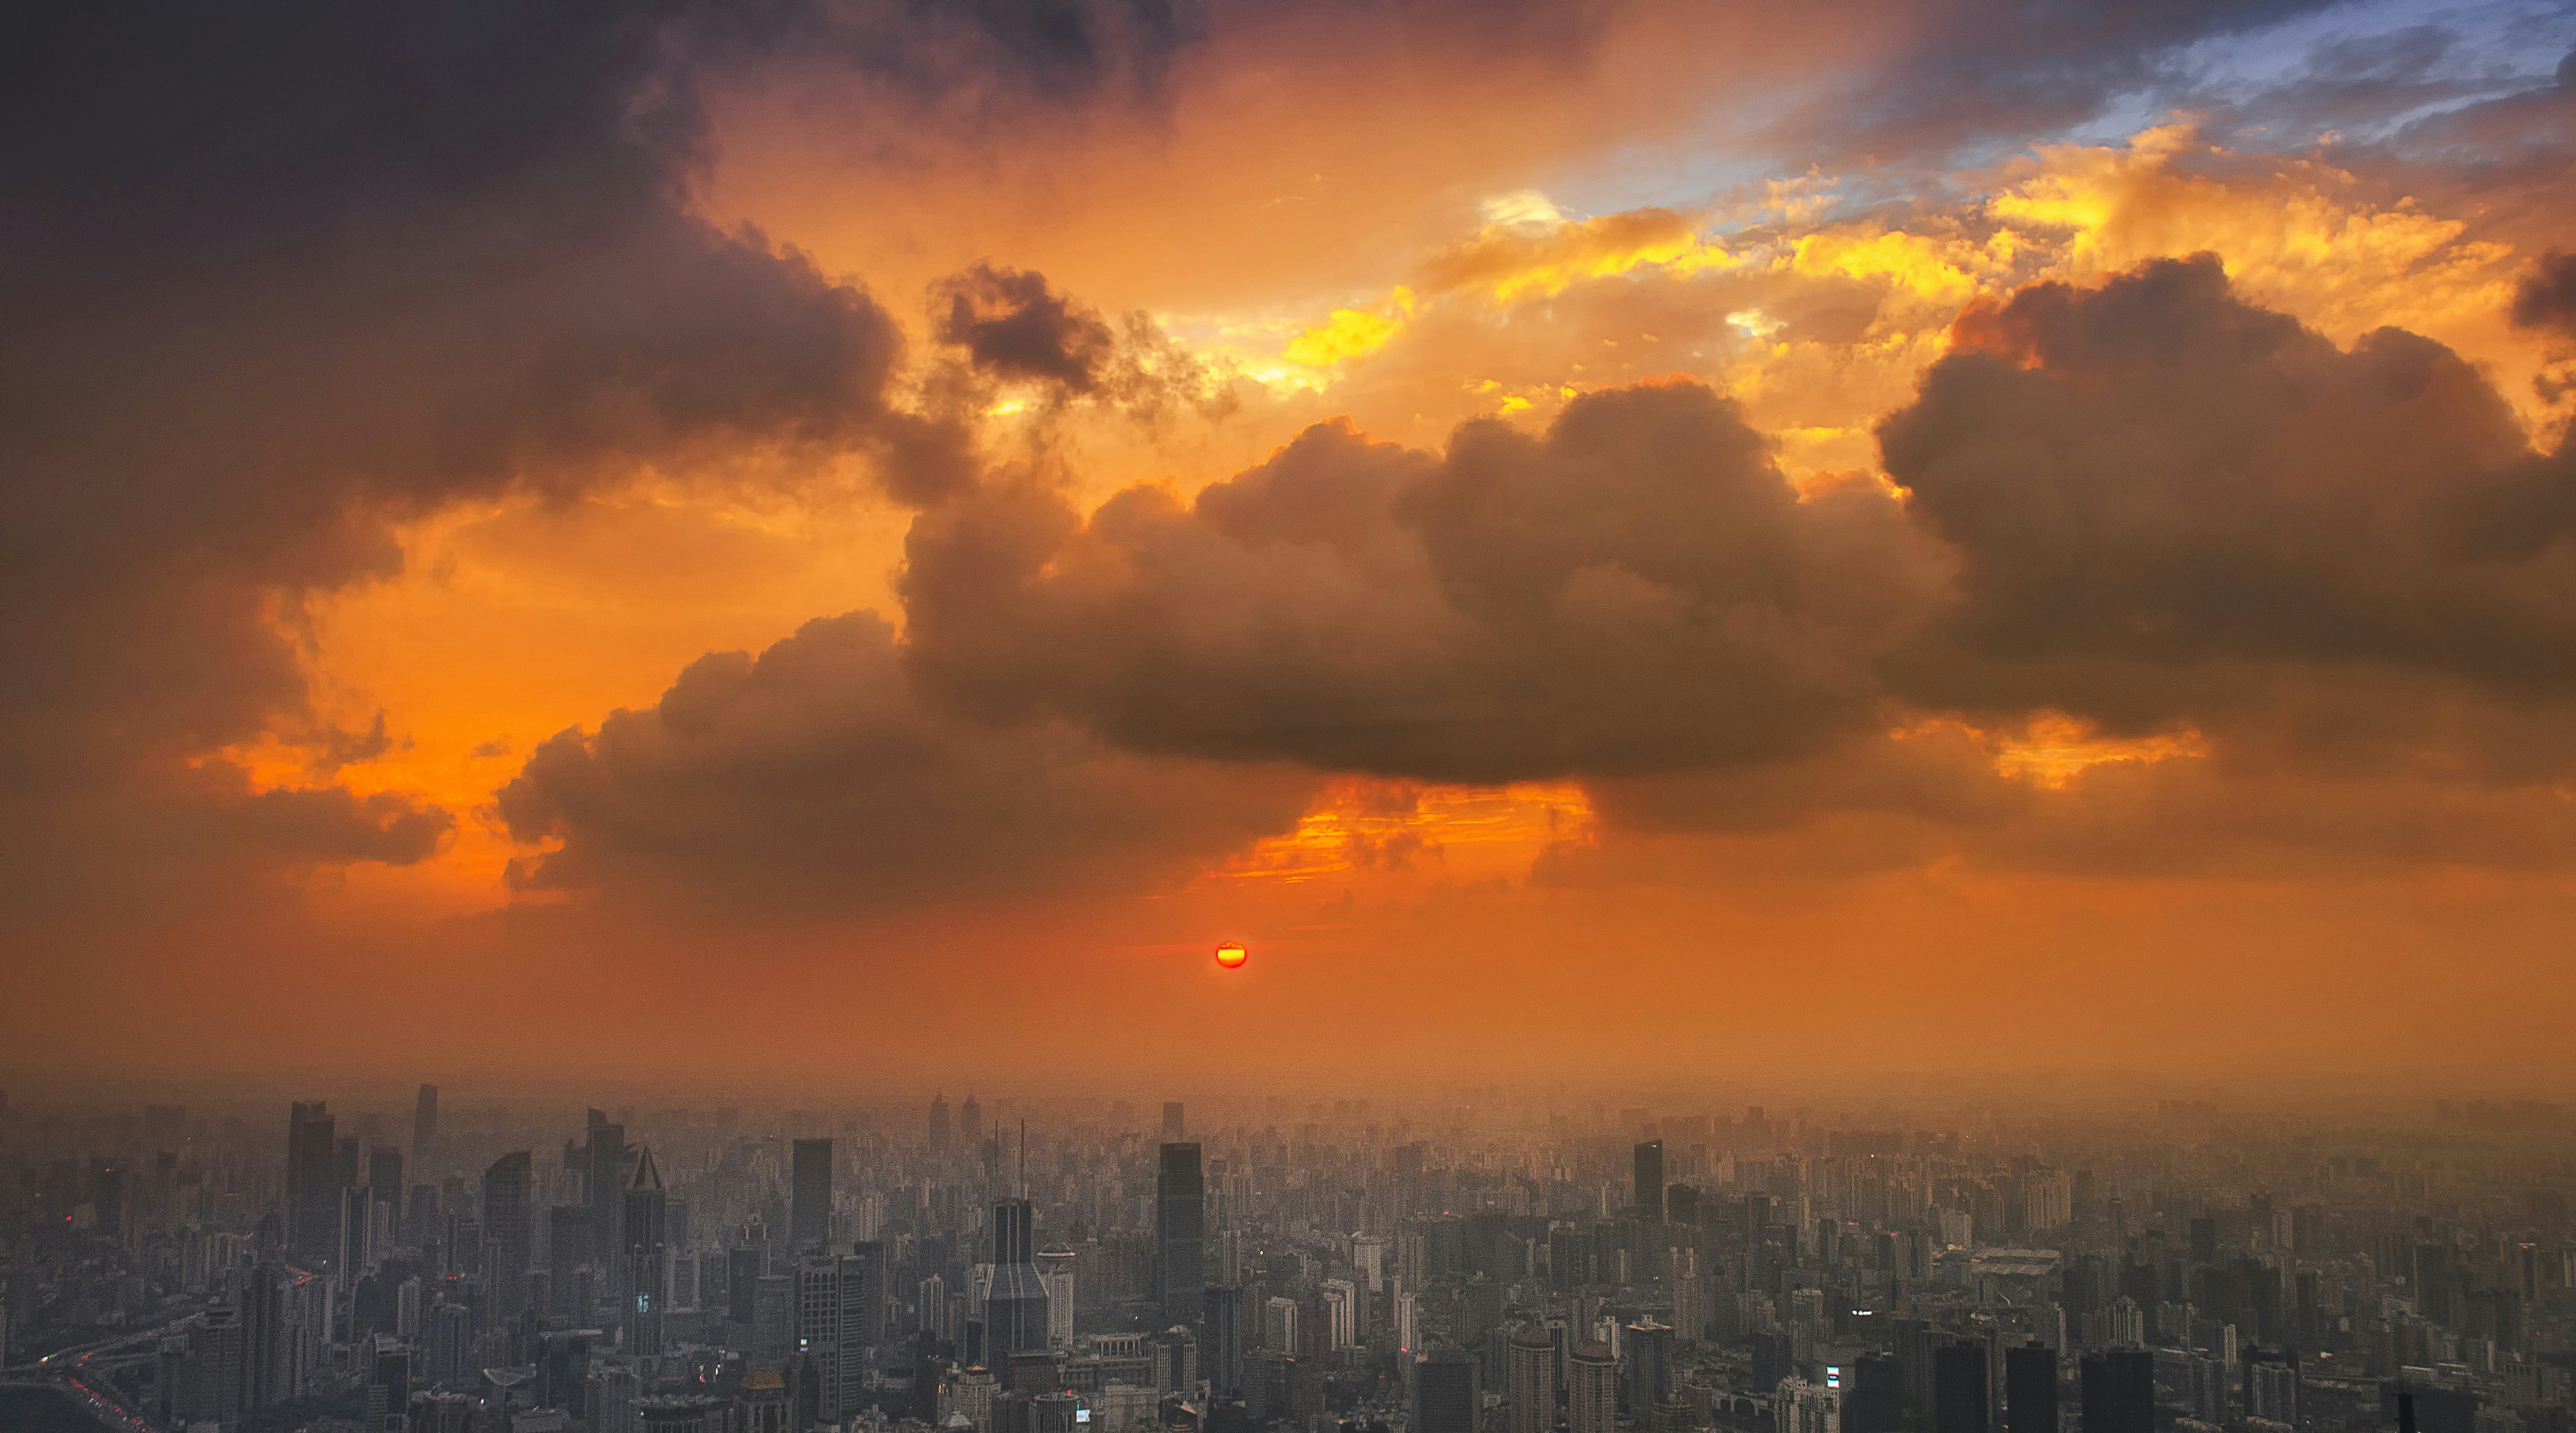 great photo recipe,how to photograph city skyline under orange and gray cloudy sky during sunset